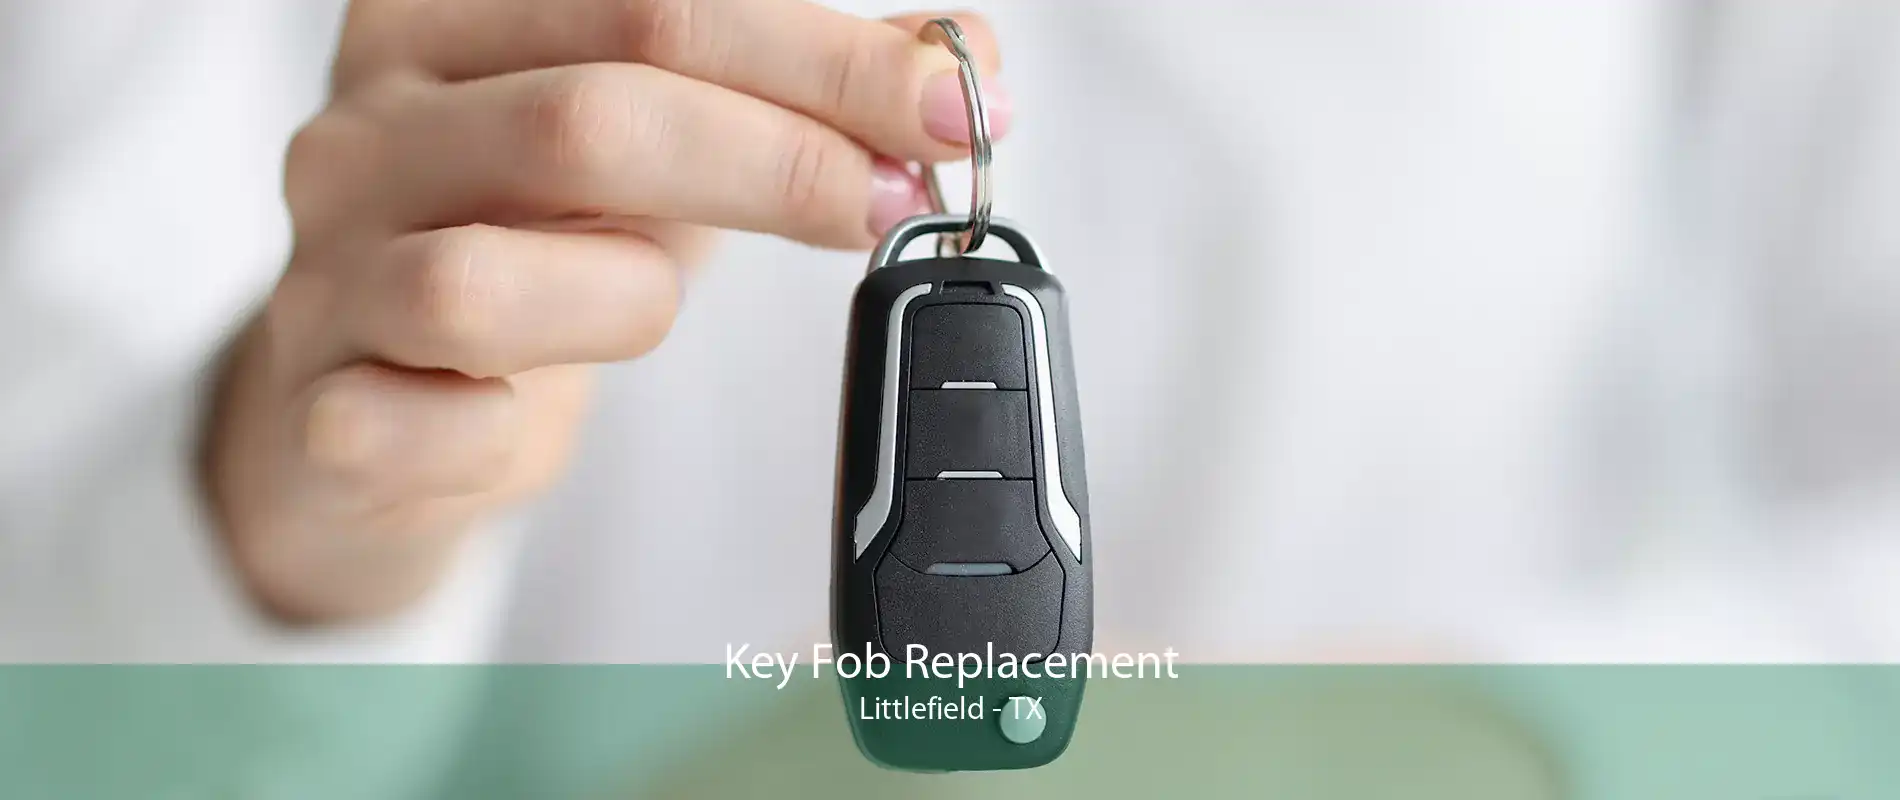 Key Fob Replacement Littlefield - TX